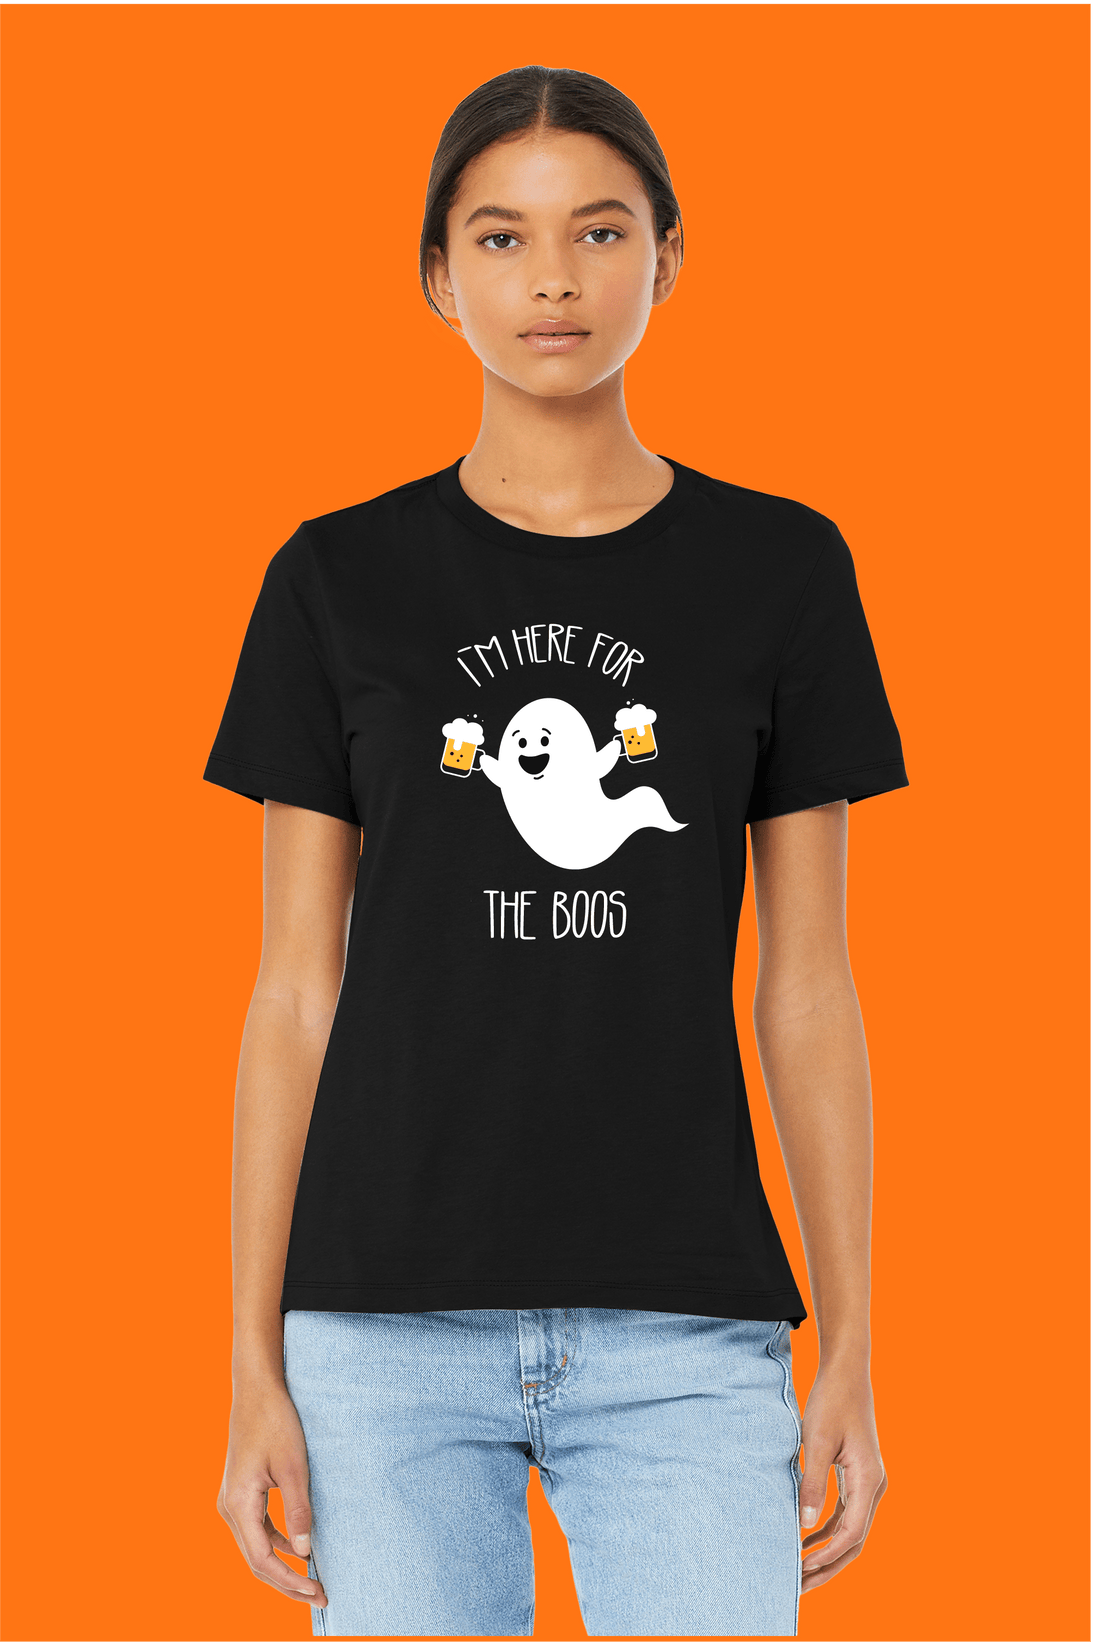 "I'm Here for the Boos" – The Perfect Halloween Party Shirt!